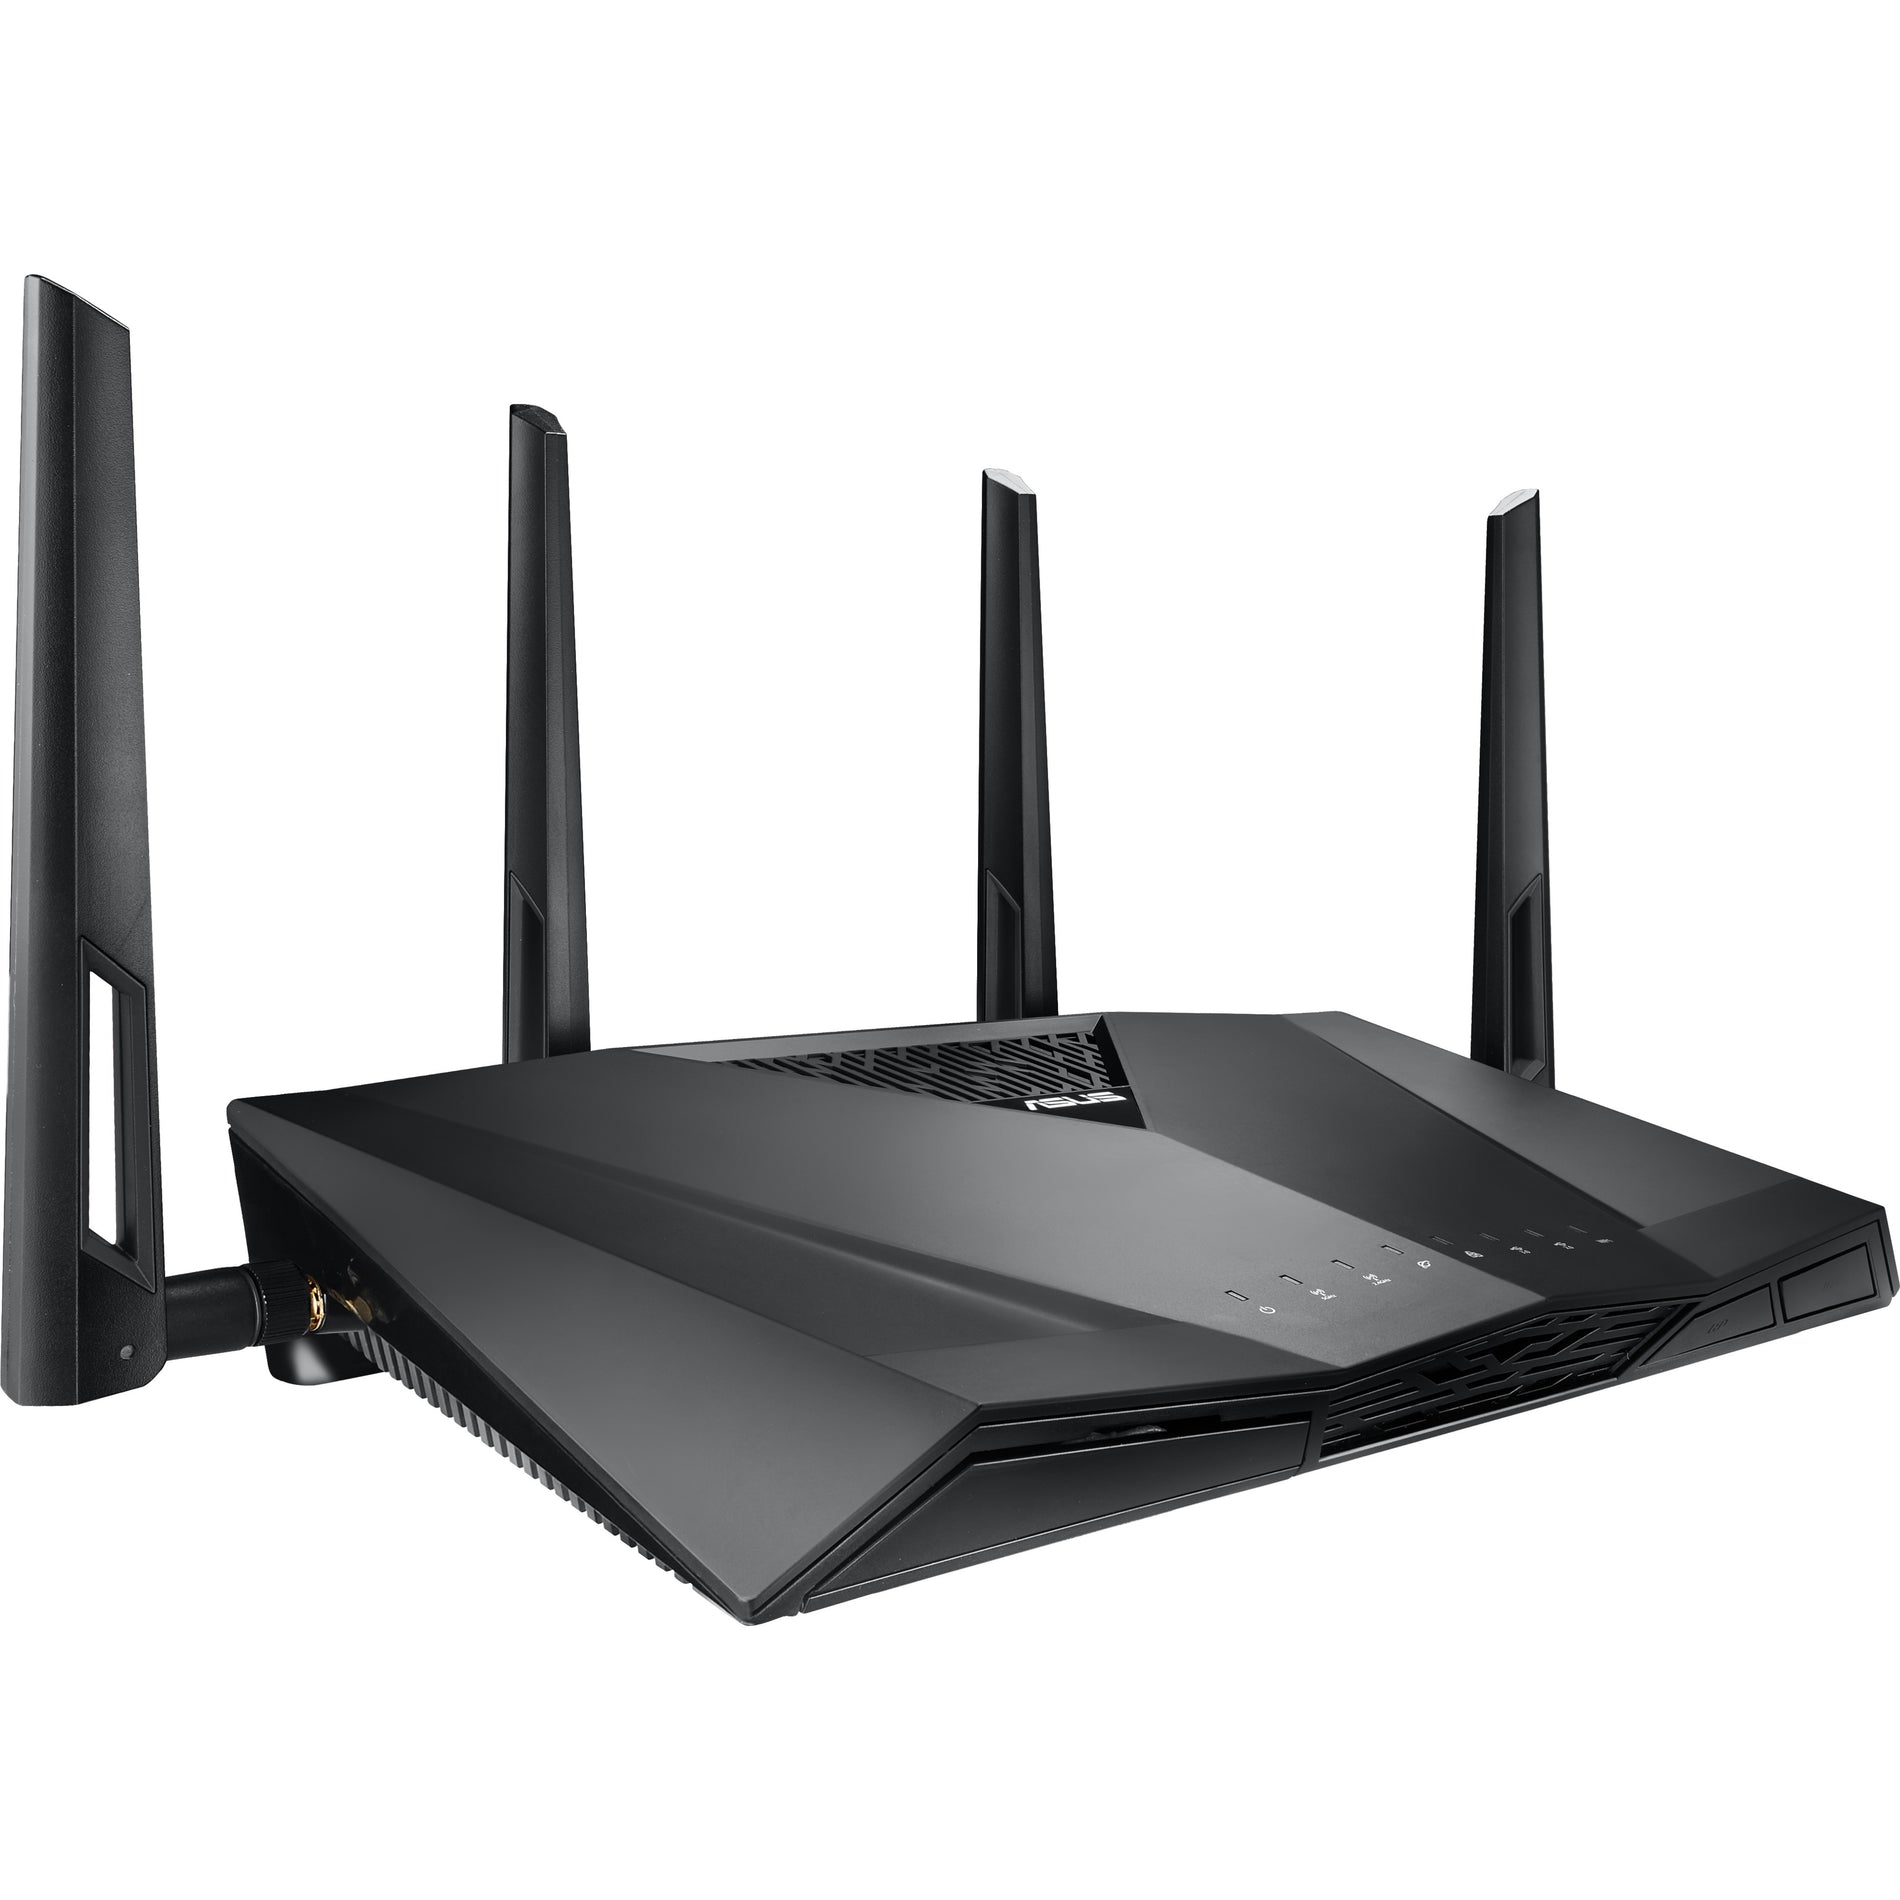 Asus RT-AC3100 Dual-band Wireless-AC3100 Gigabit Router, Wi-Fi 5, 387.50 MB/s